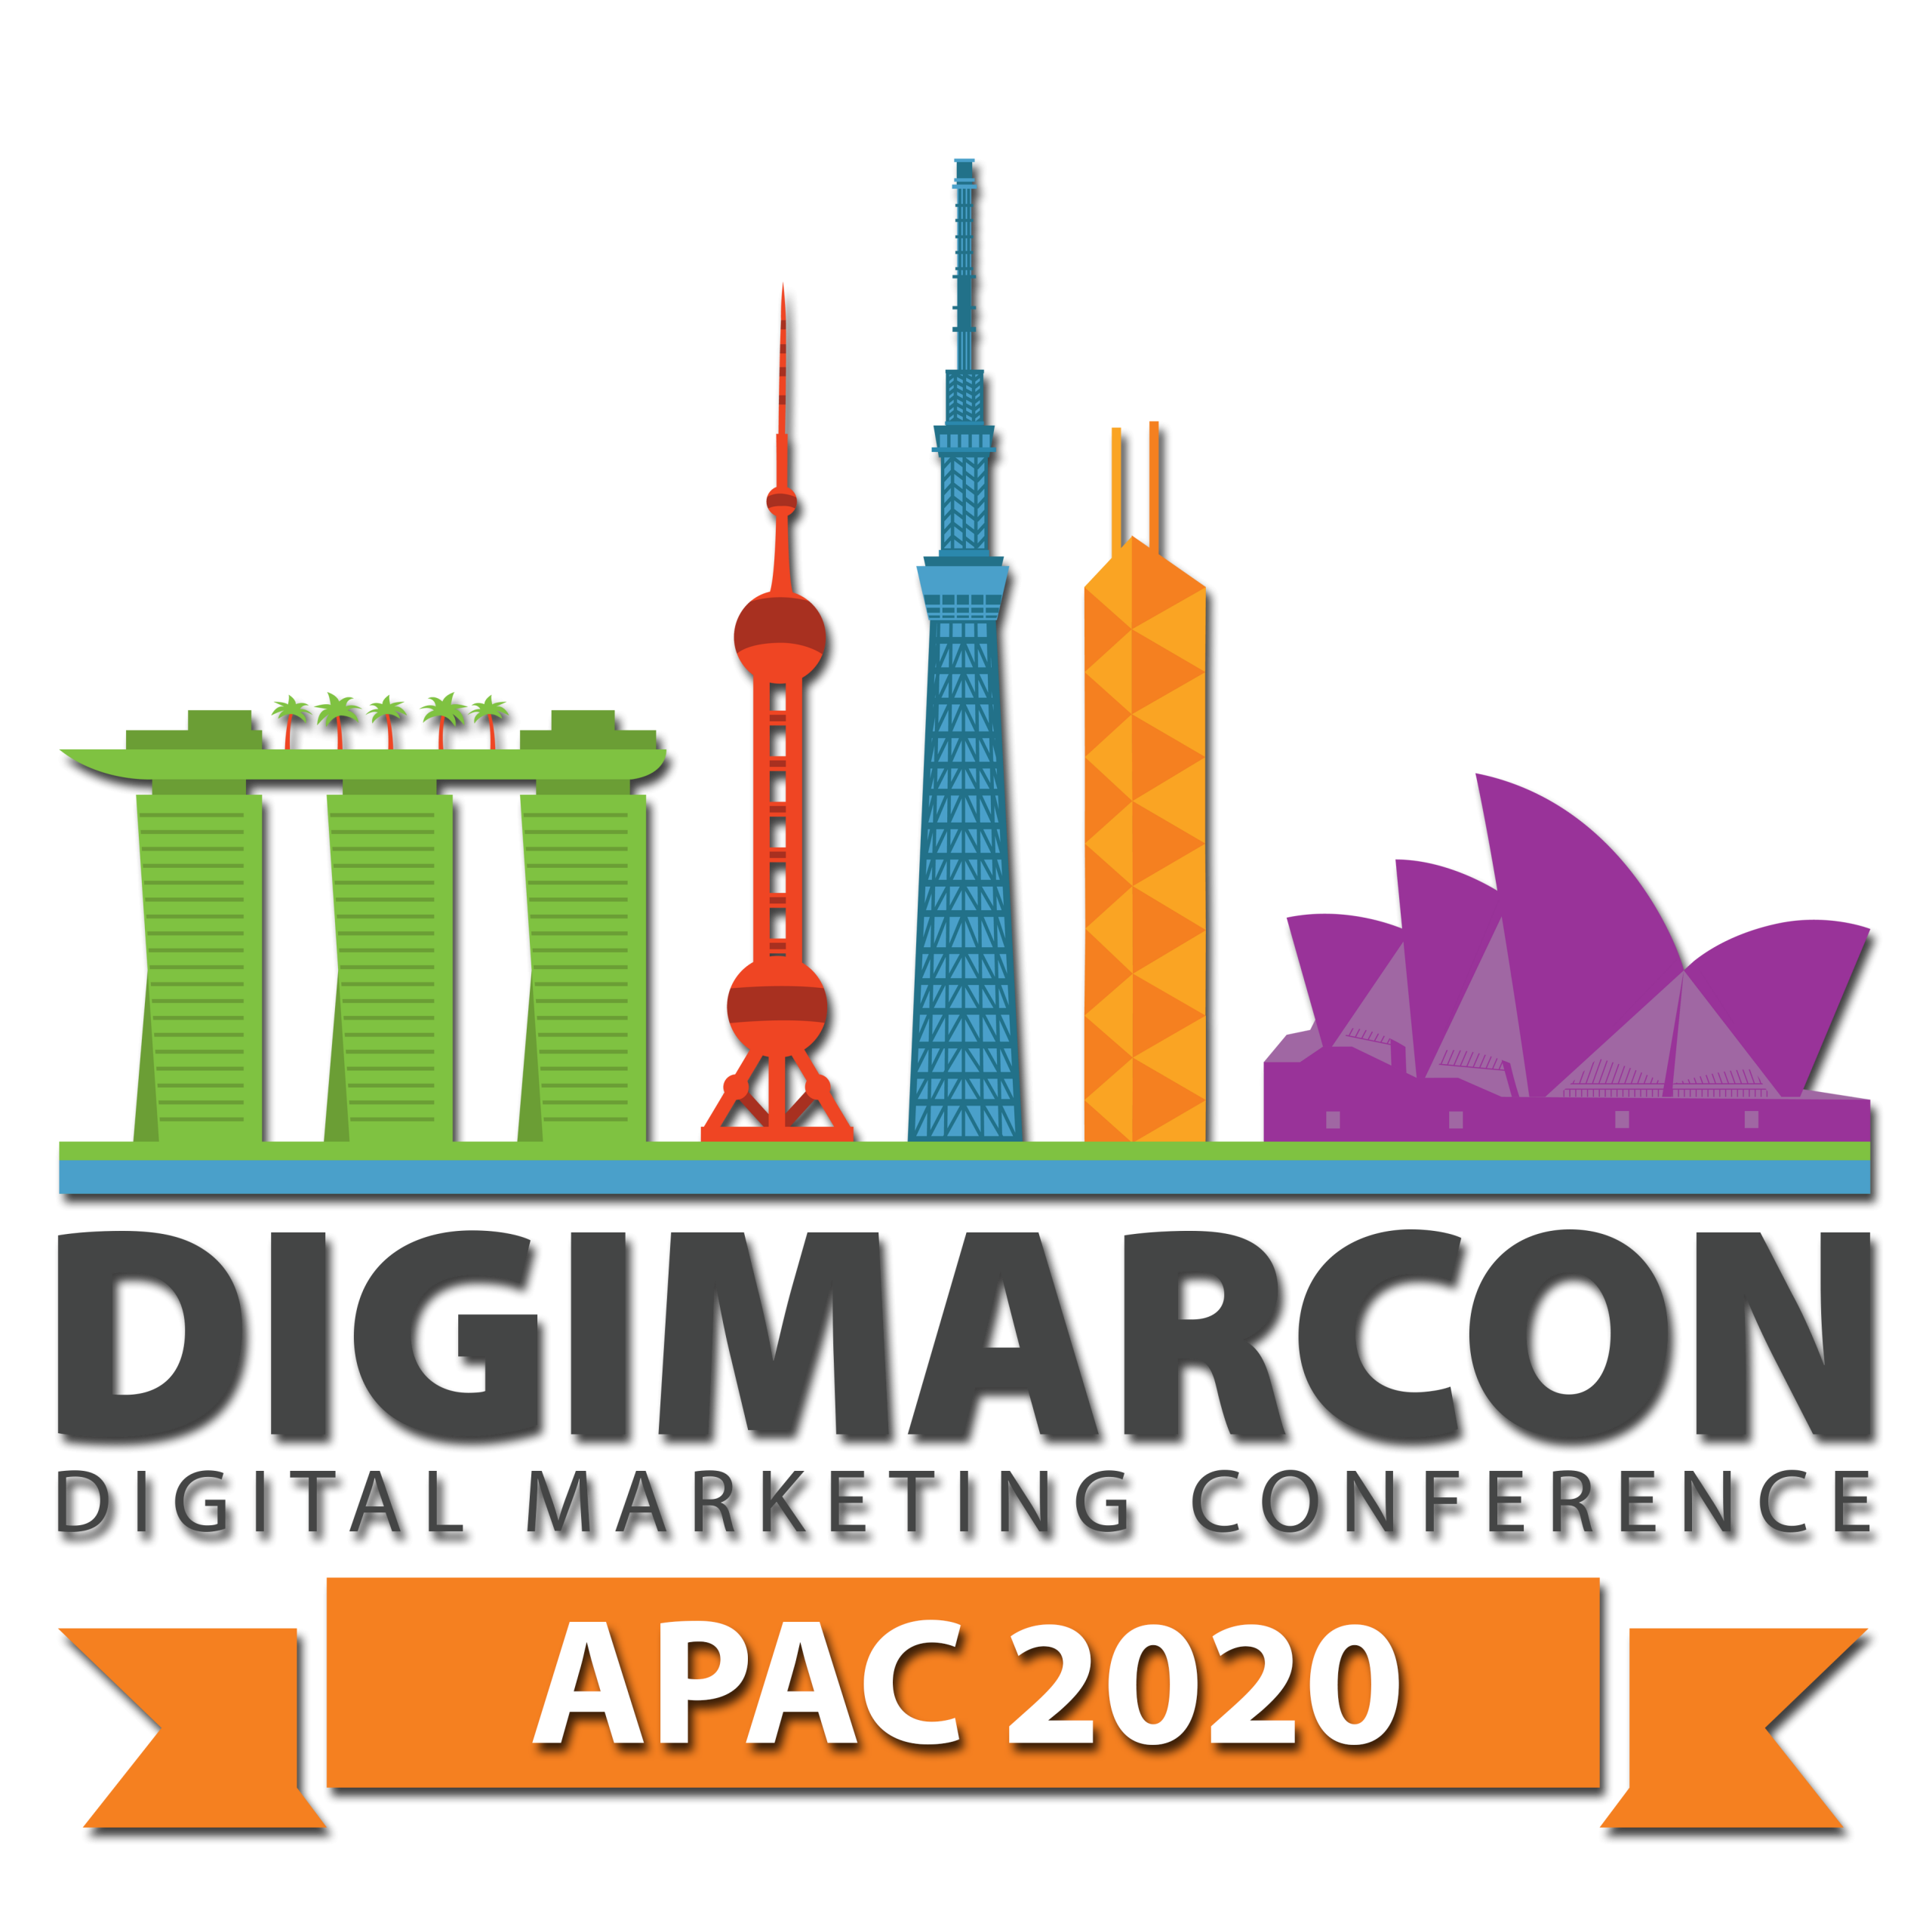 DigiMarCon Asia Pacific – Digital Marketing, Media and Advertising Conference